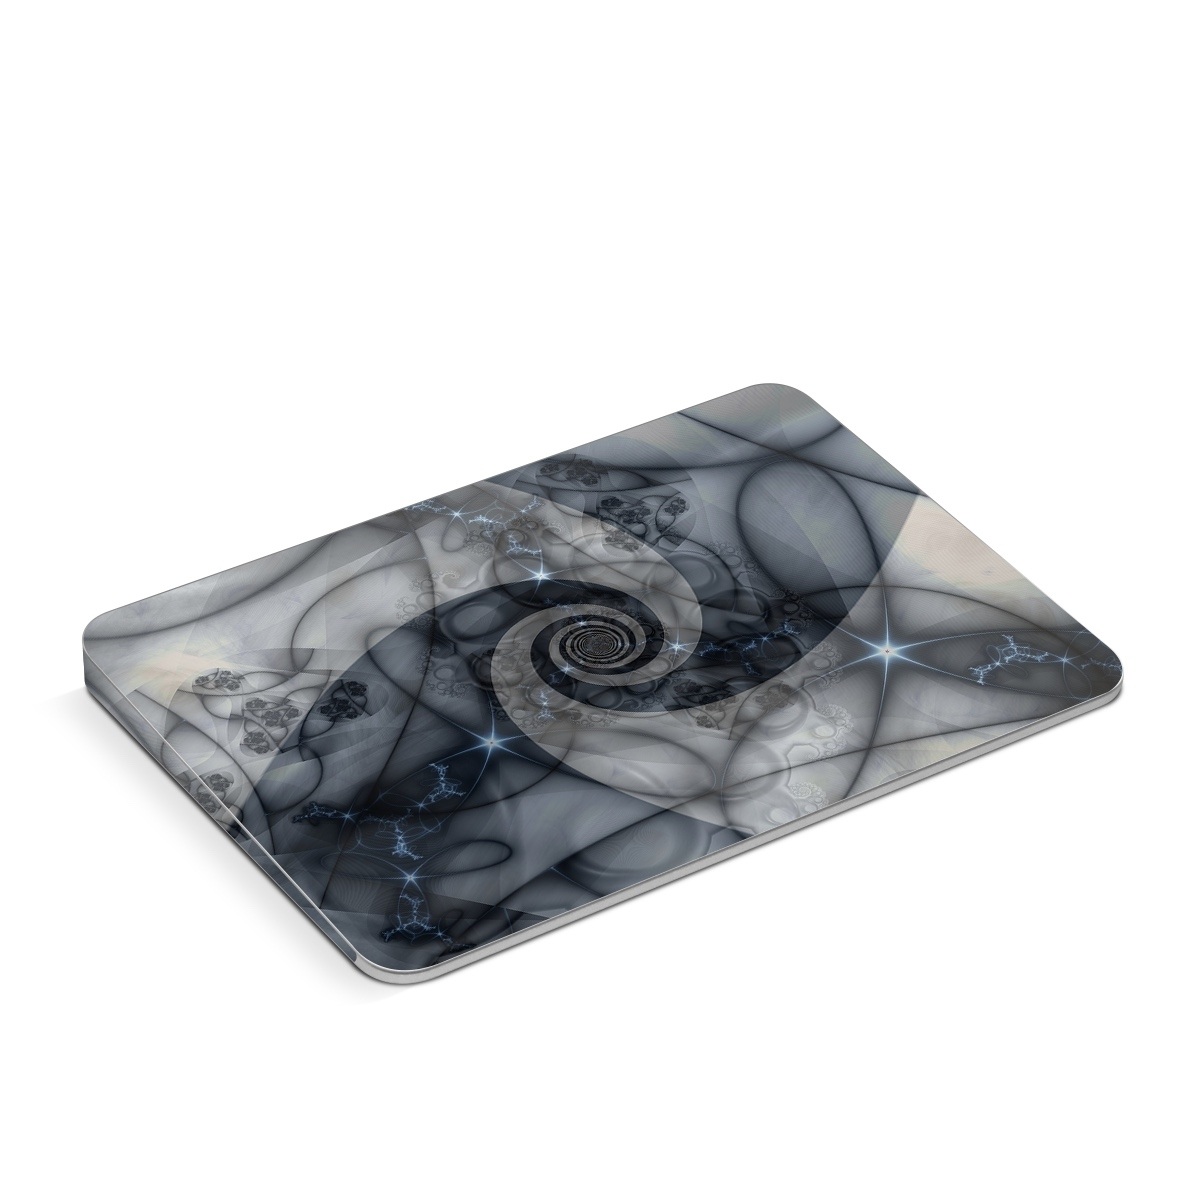 Apple Magic Trackpad Skin design of Eye, Drawing, Black-and-white, Design, Pattern, Art, Tattoo, Illustration, Fractal art, with black, gray colors